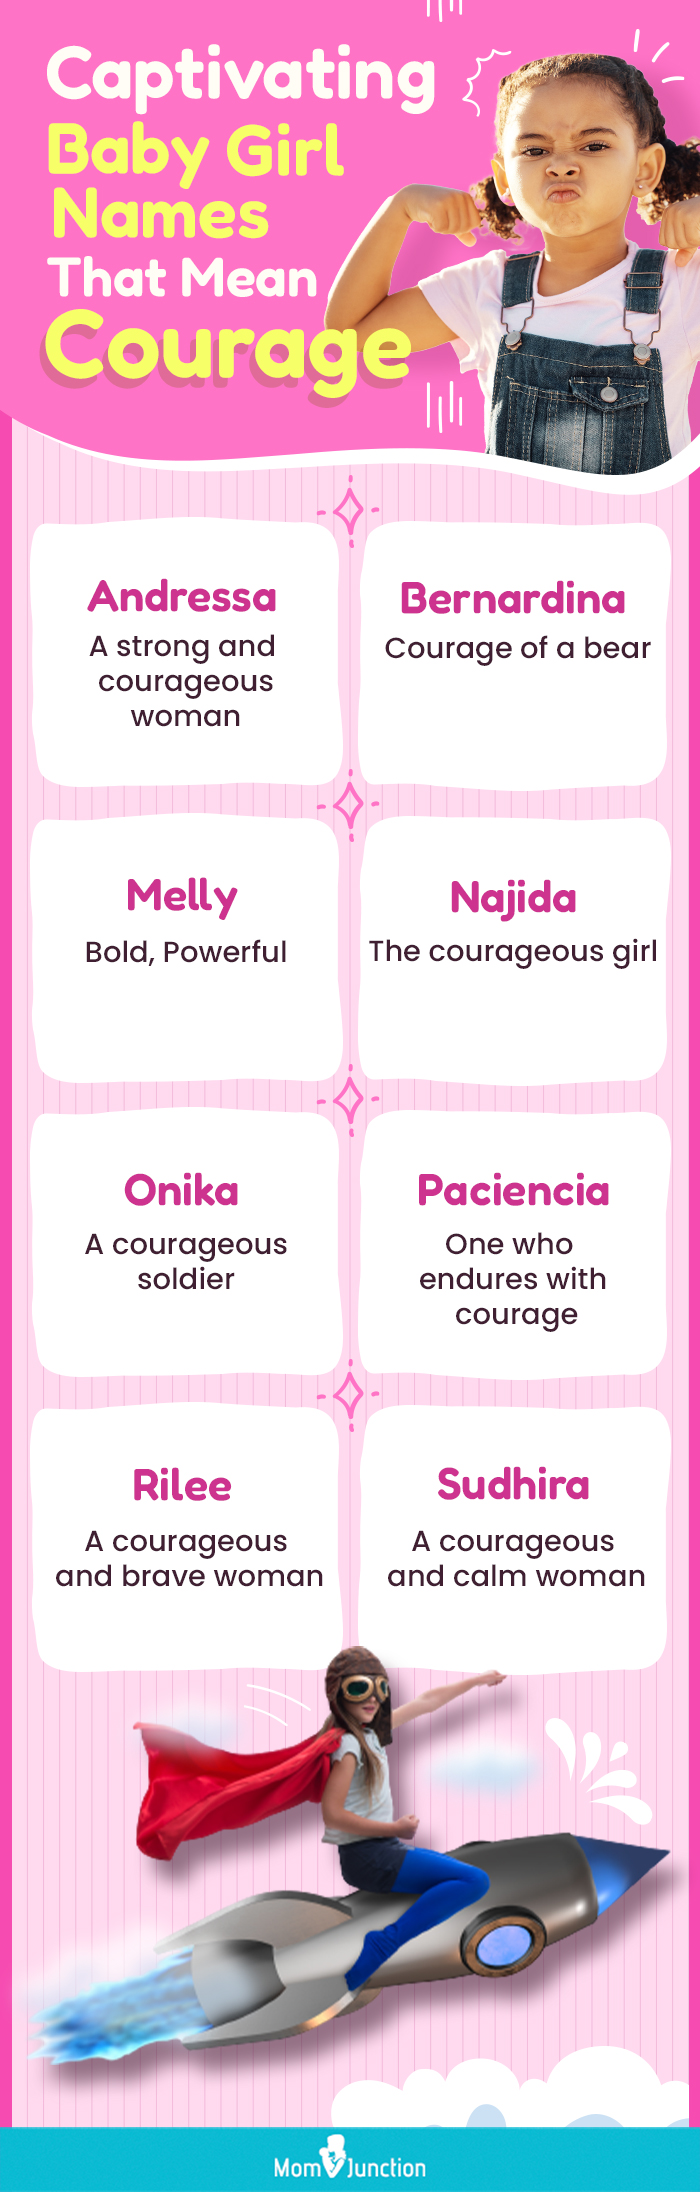 captivating baby girl names that mean courage (infographic)